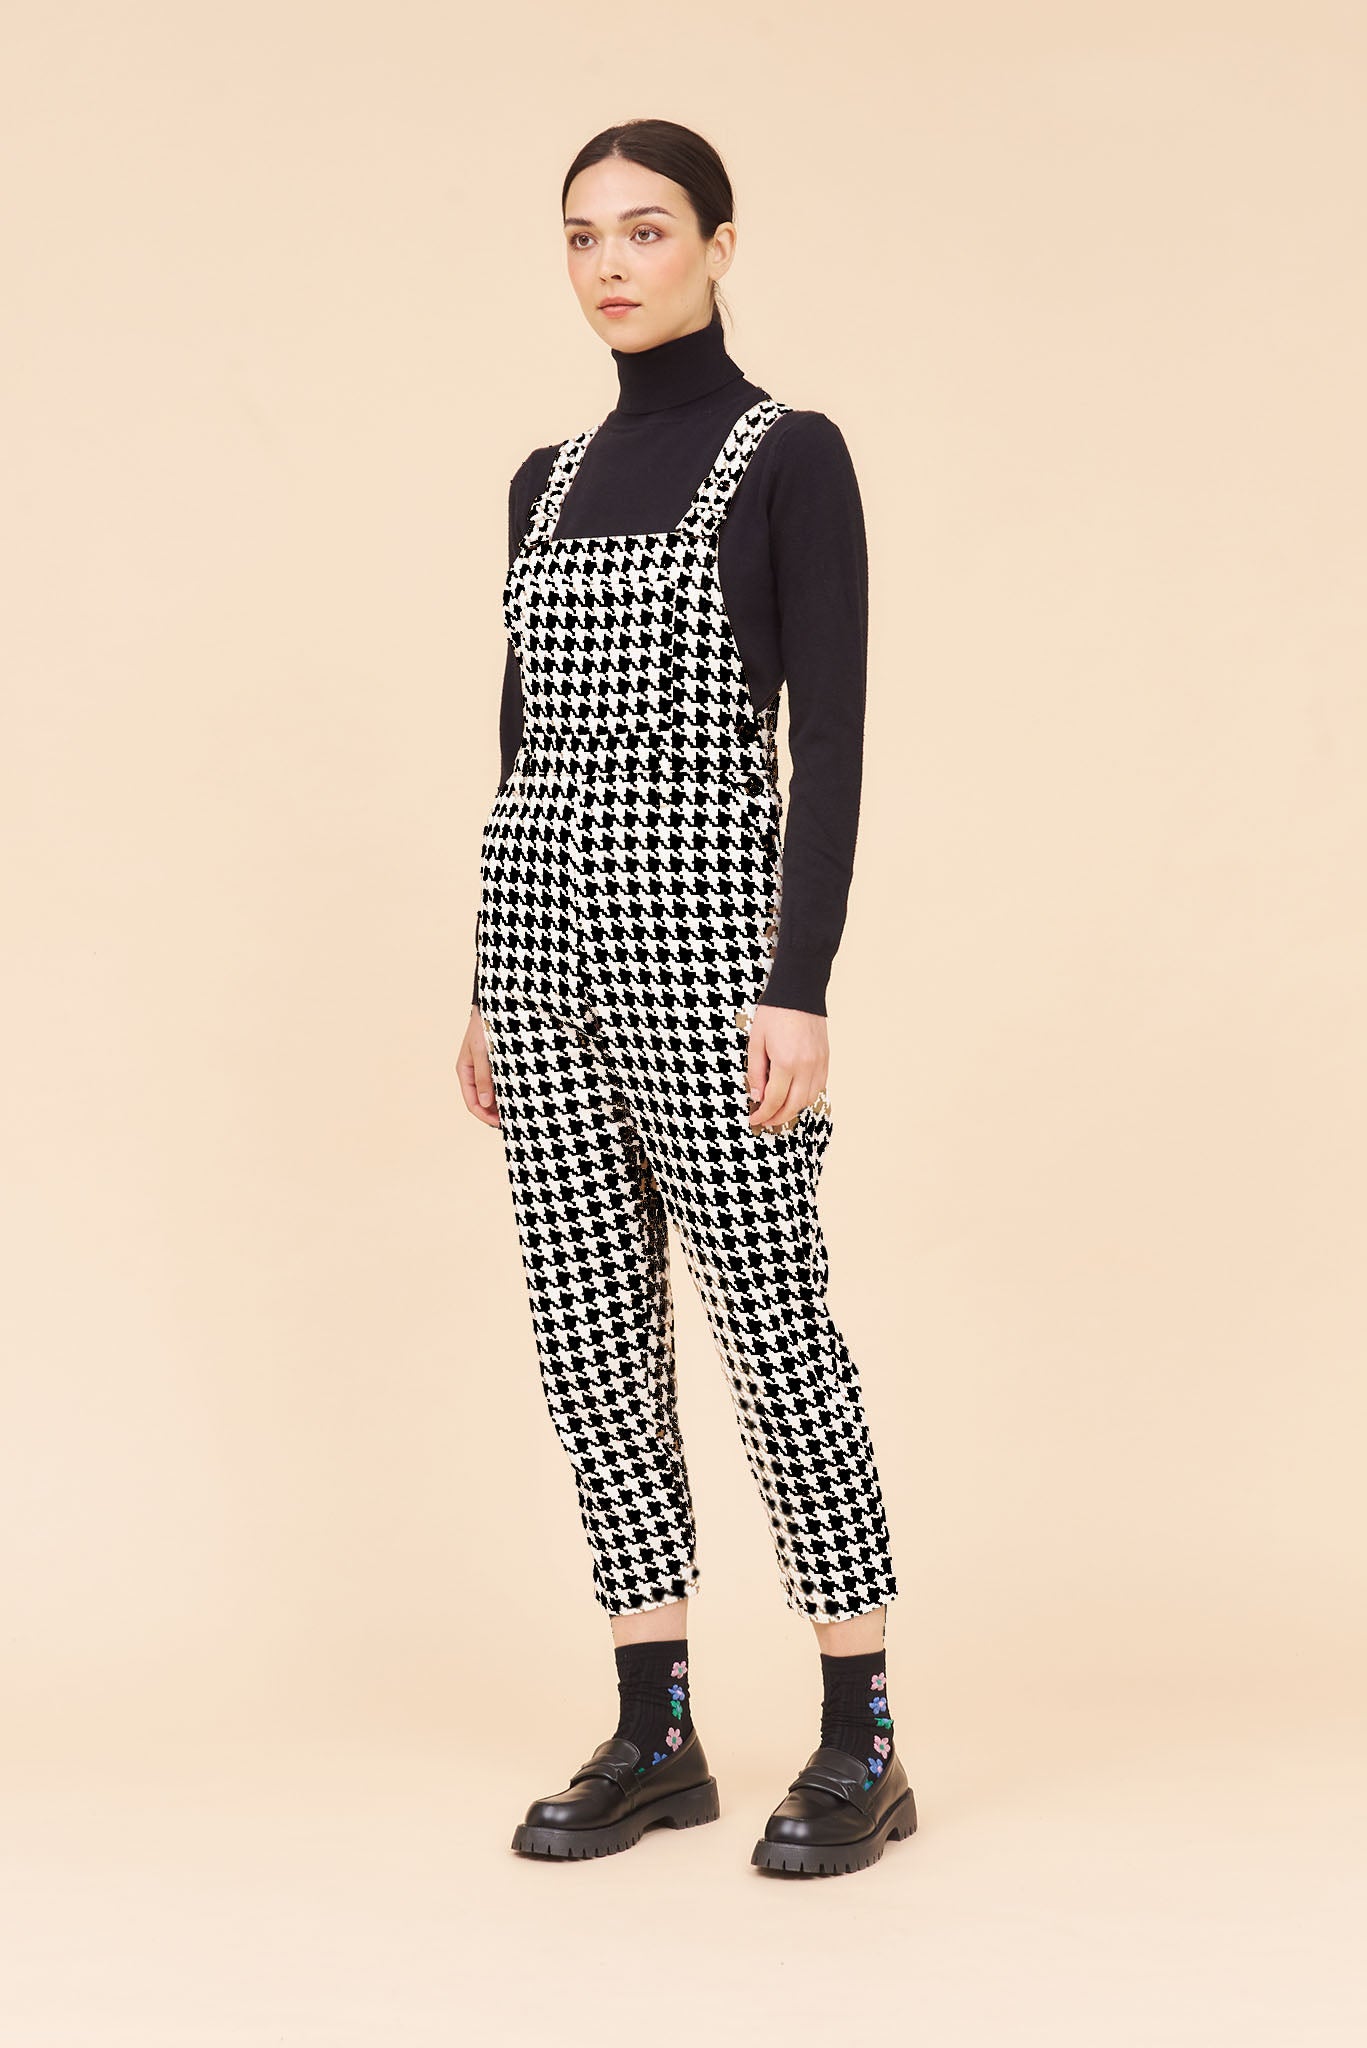 "JOY" Utility Overall Dungaree Jumpsuits in Black Houndstooth Cotton Twill